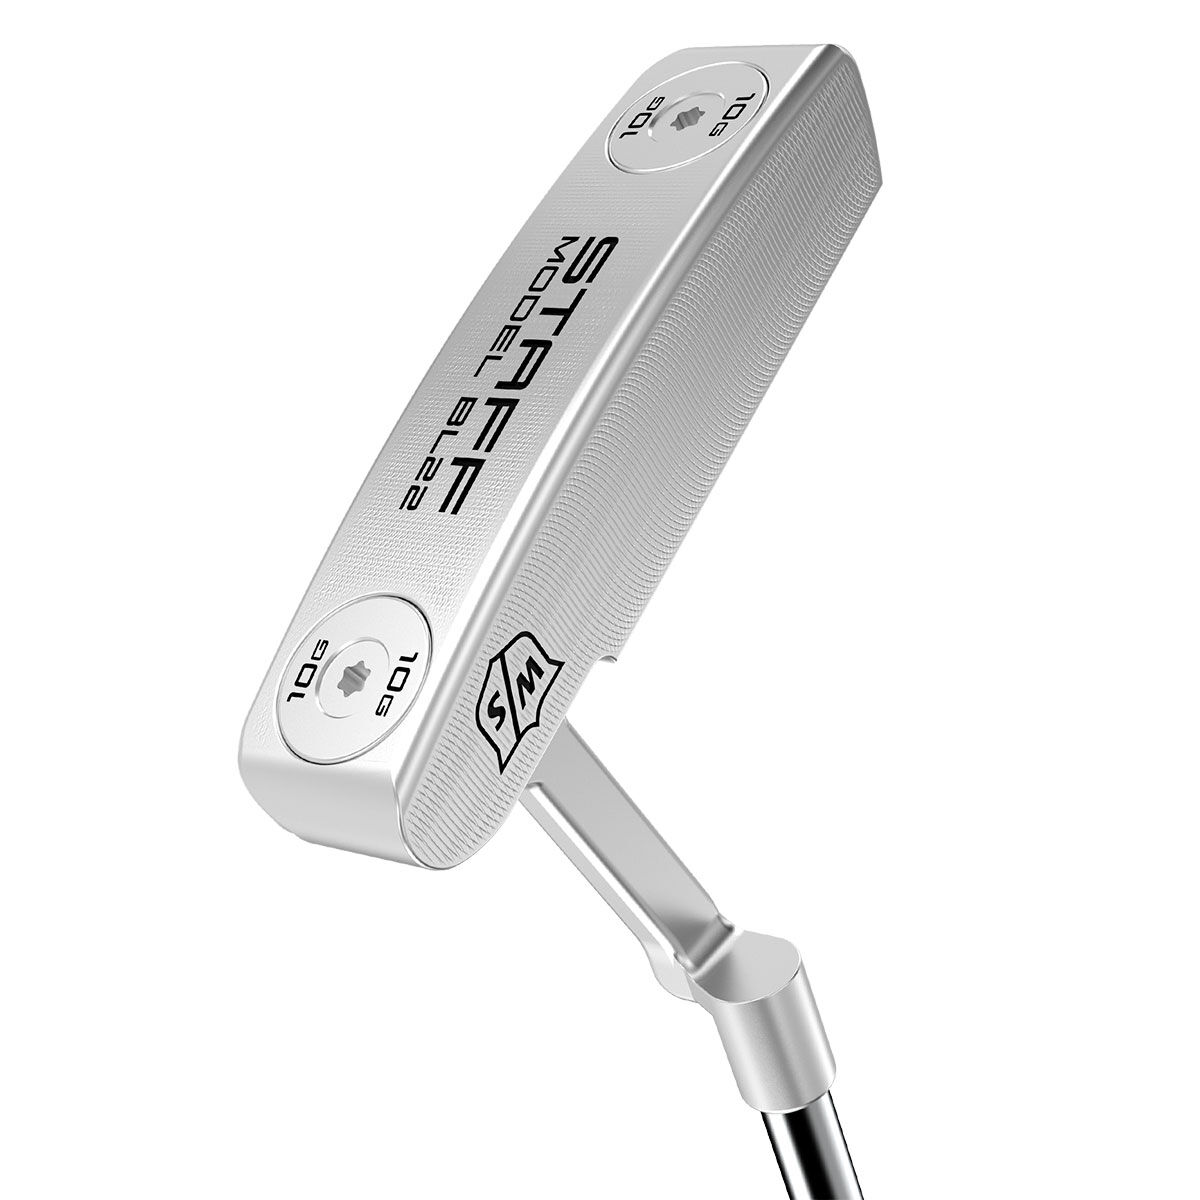 Wilson Staff Silver Model BL22 Right Hand Golf Putter, Size: 34" | American Golf, 34 inches